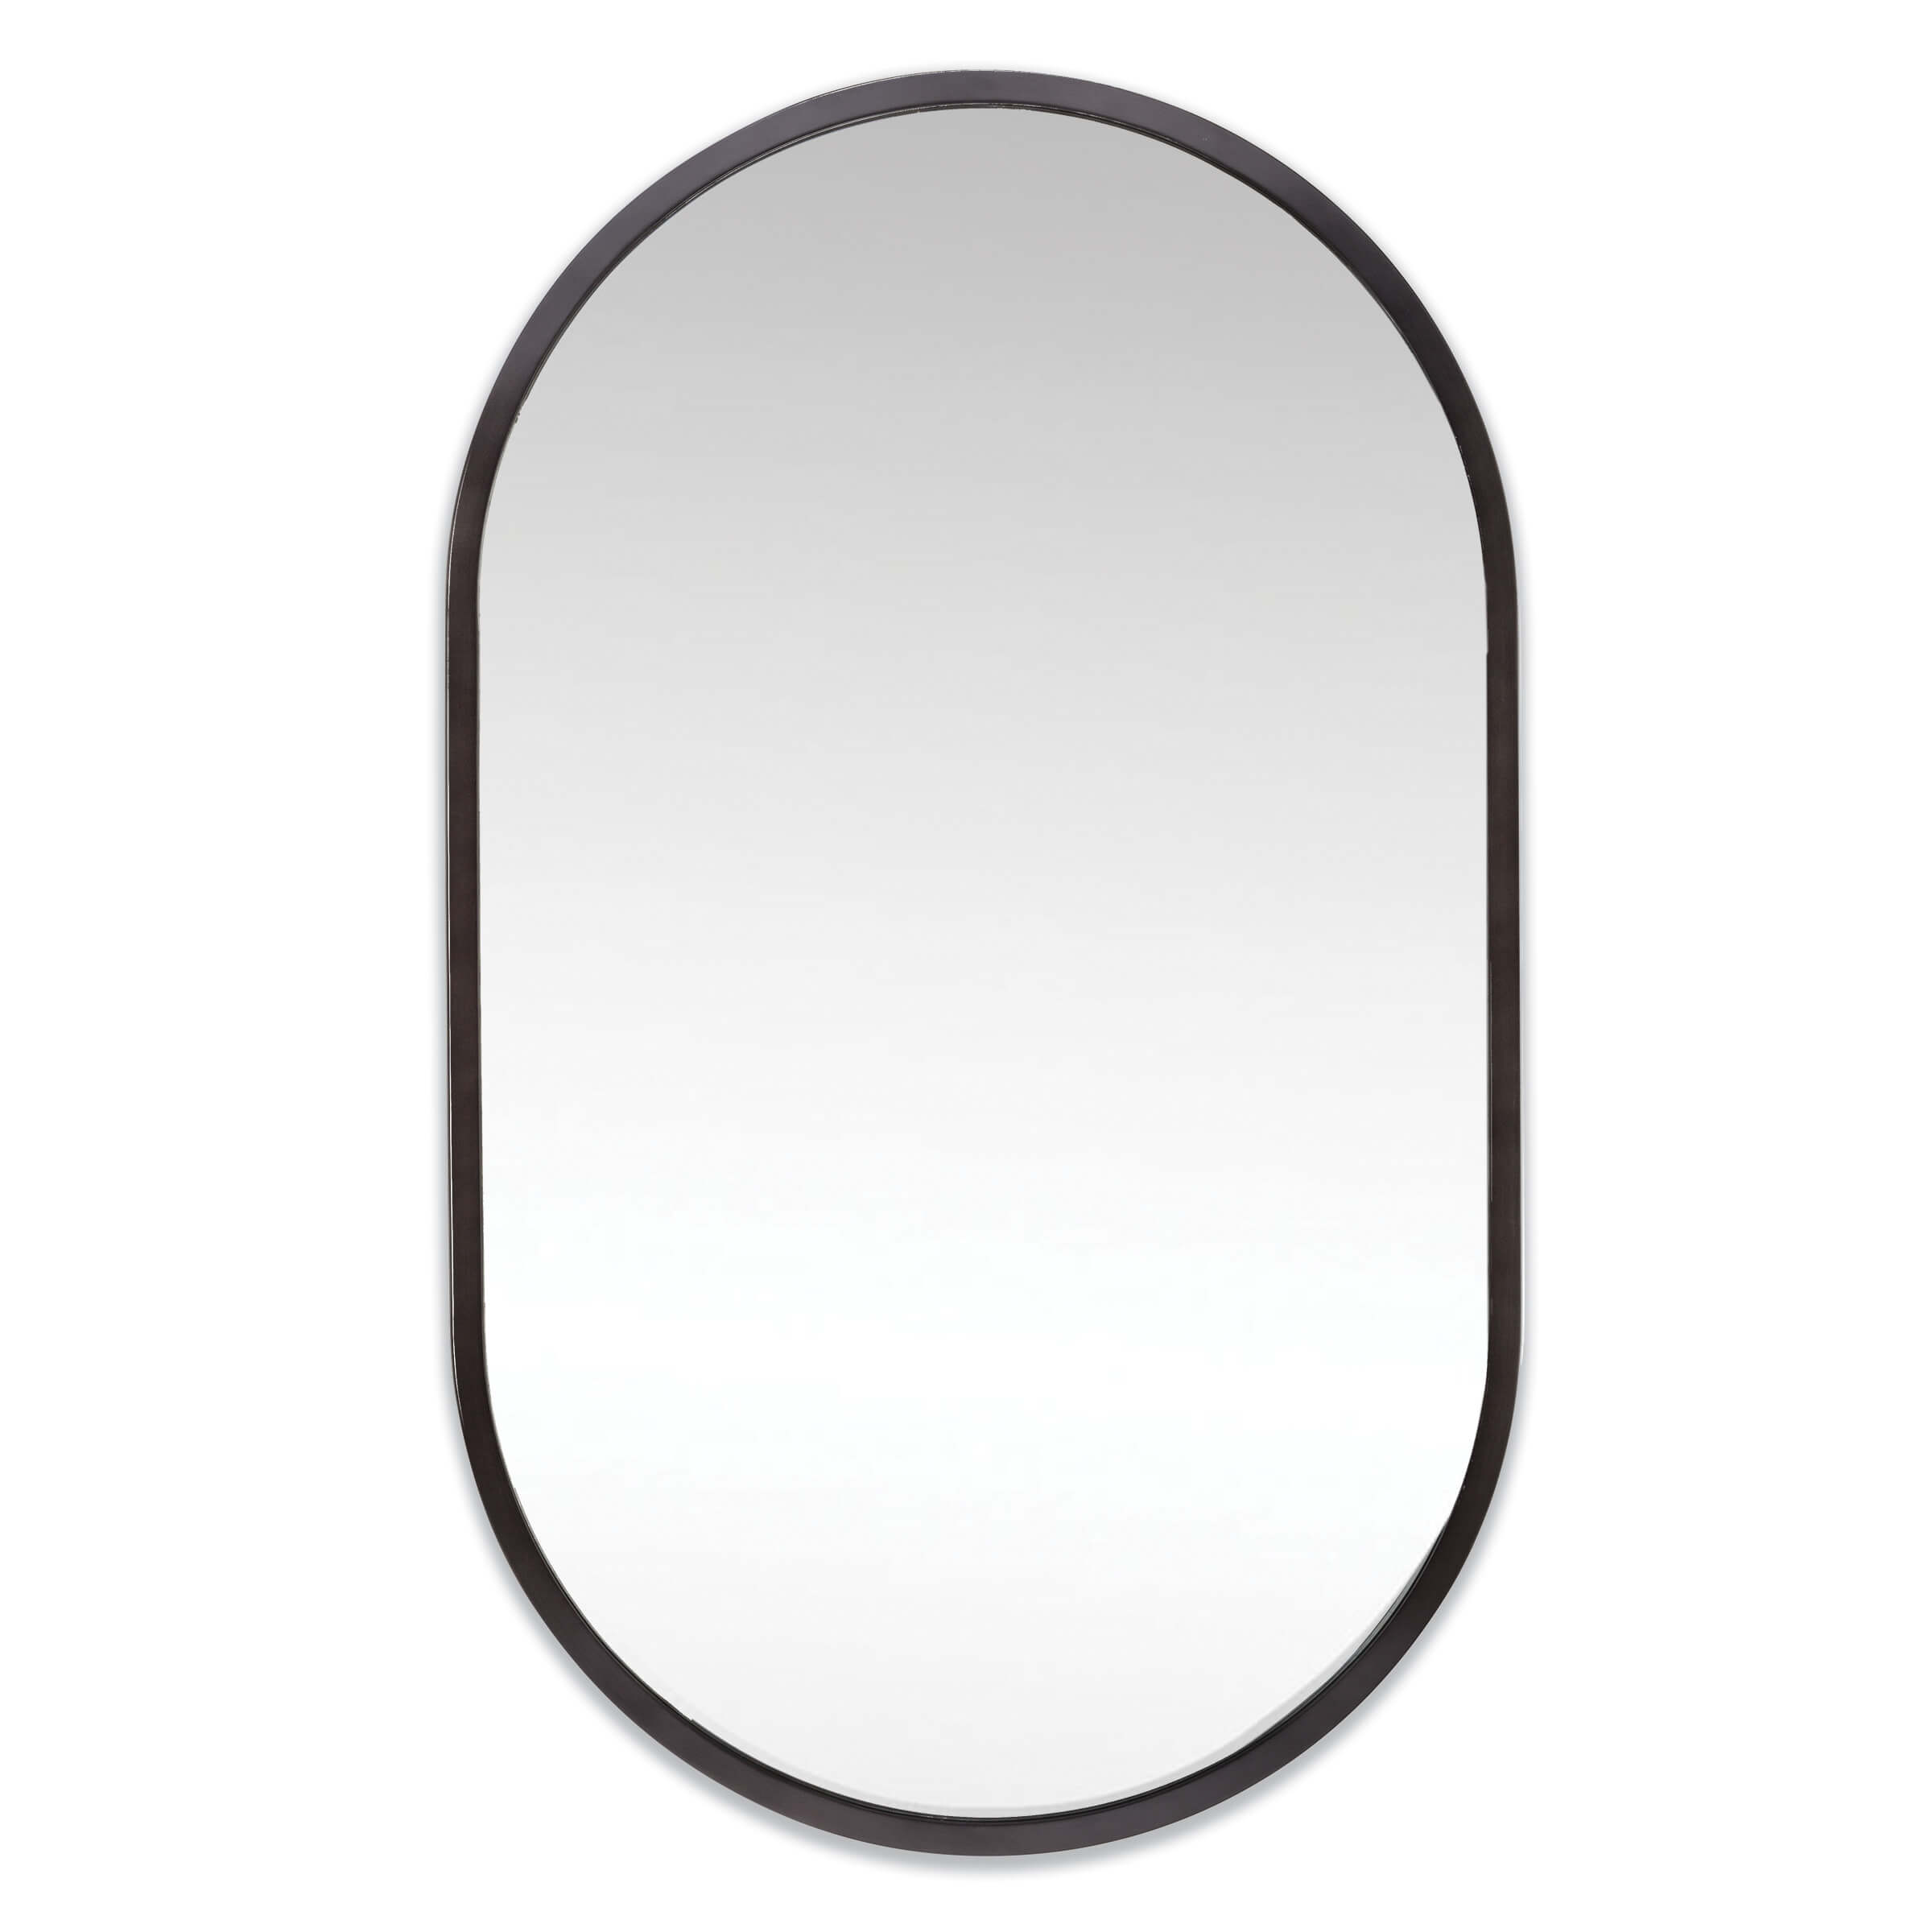 Arched oval black bold mirror